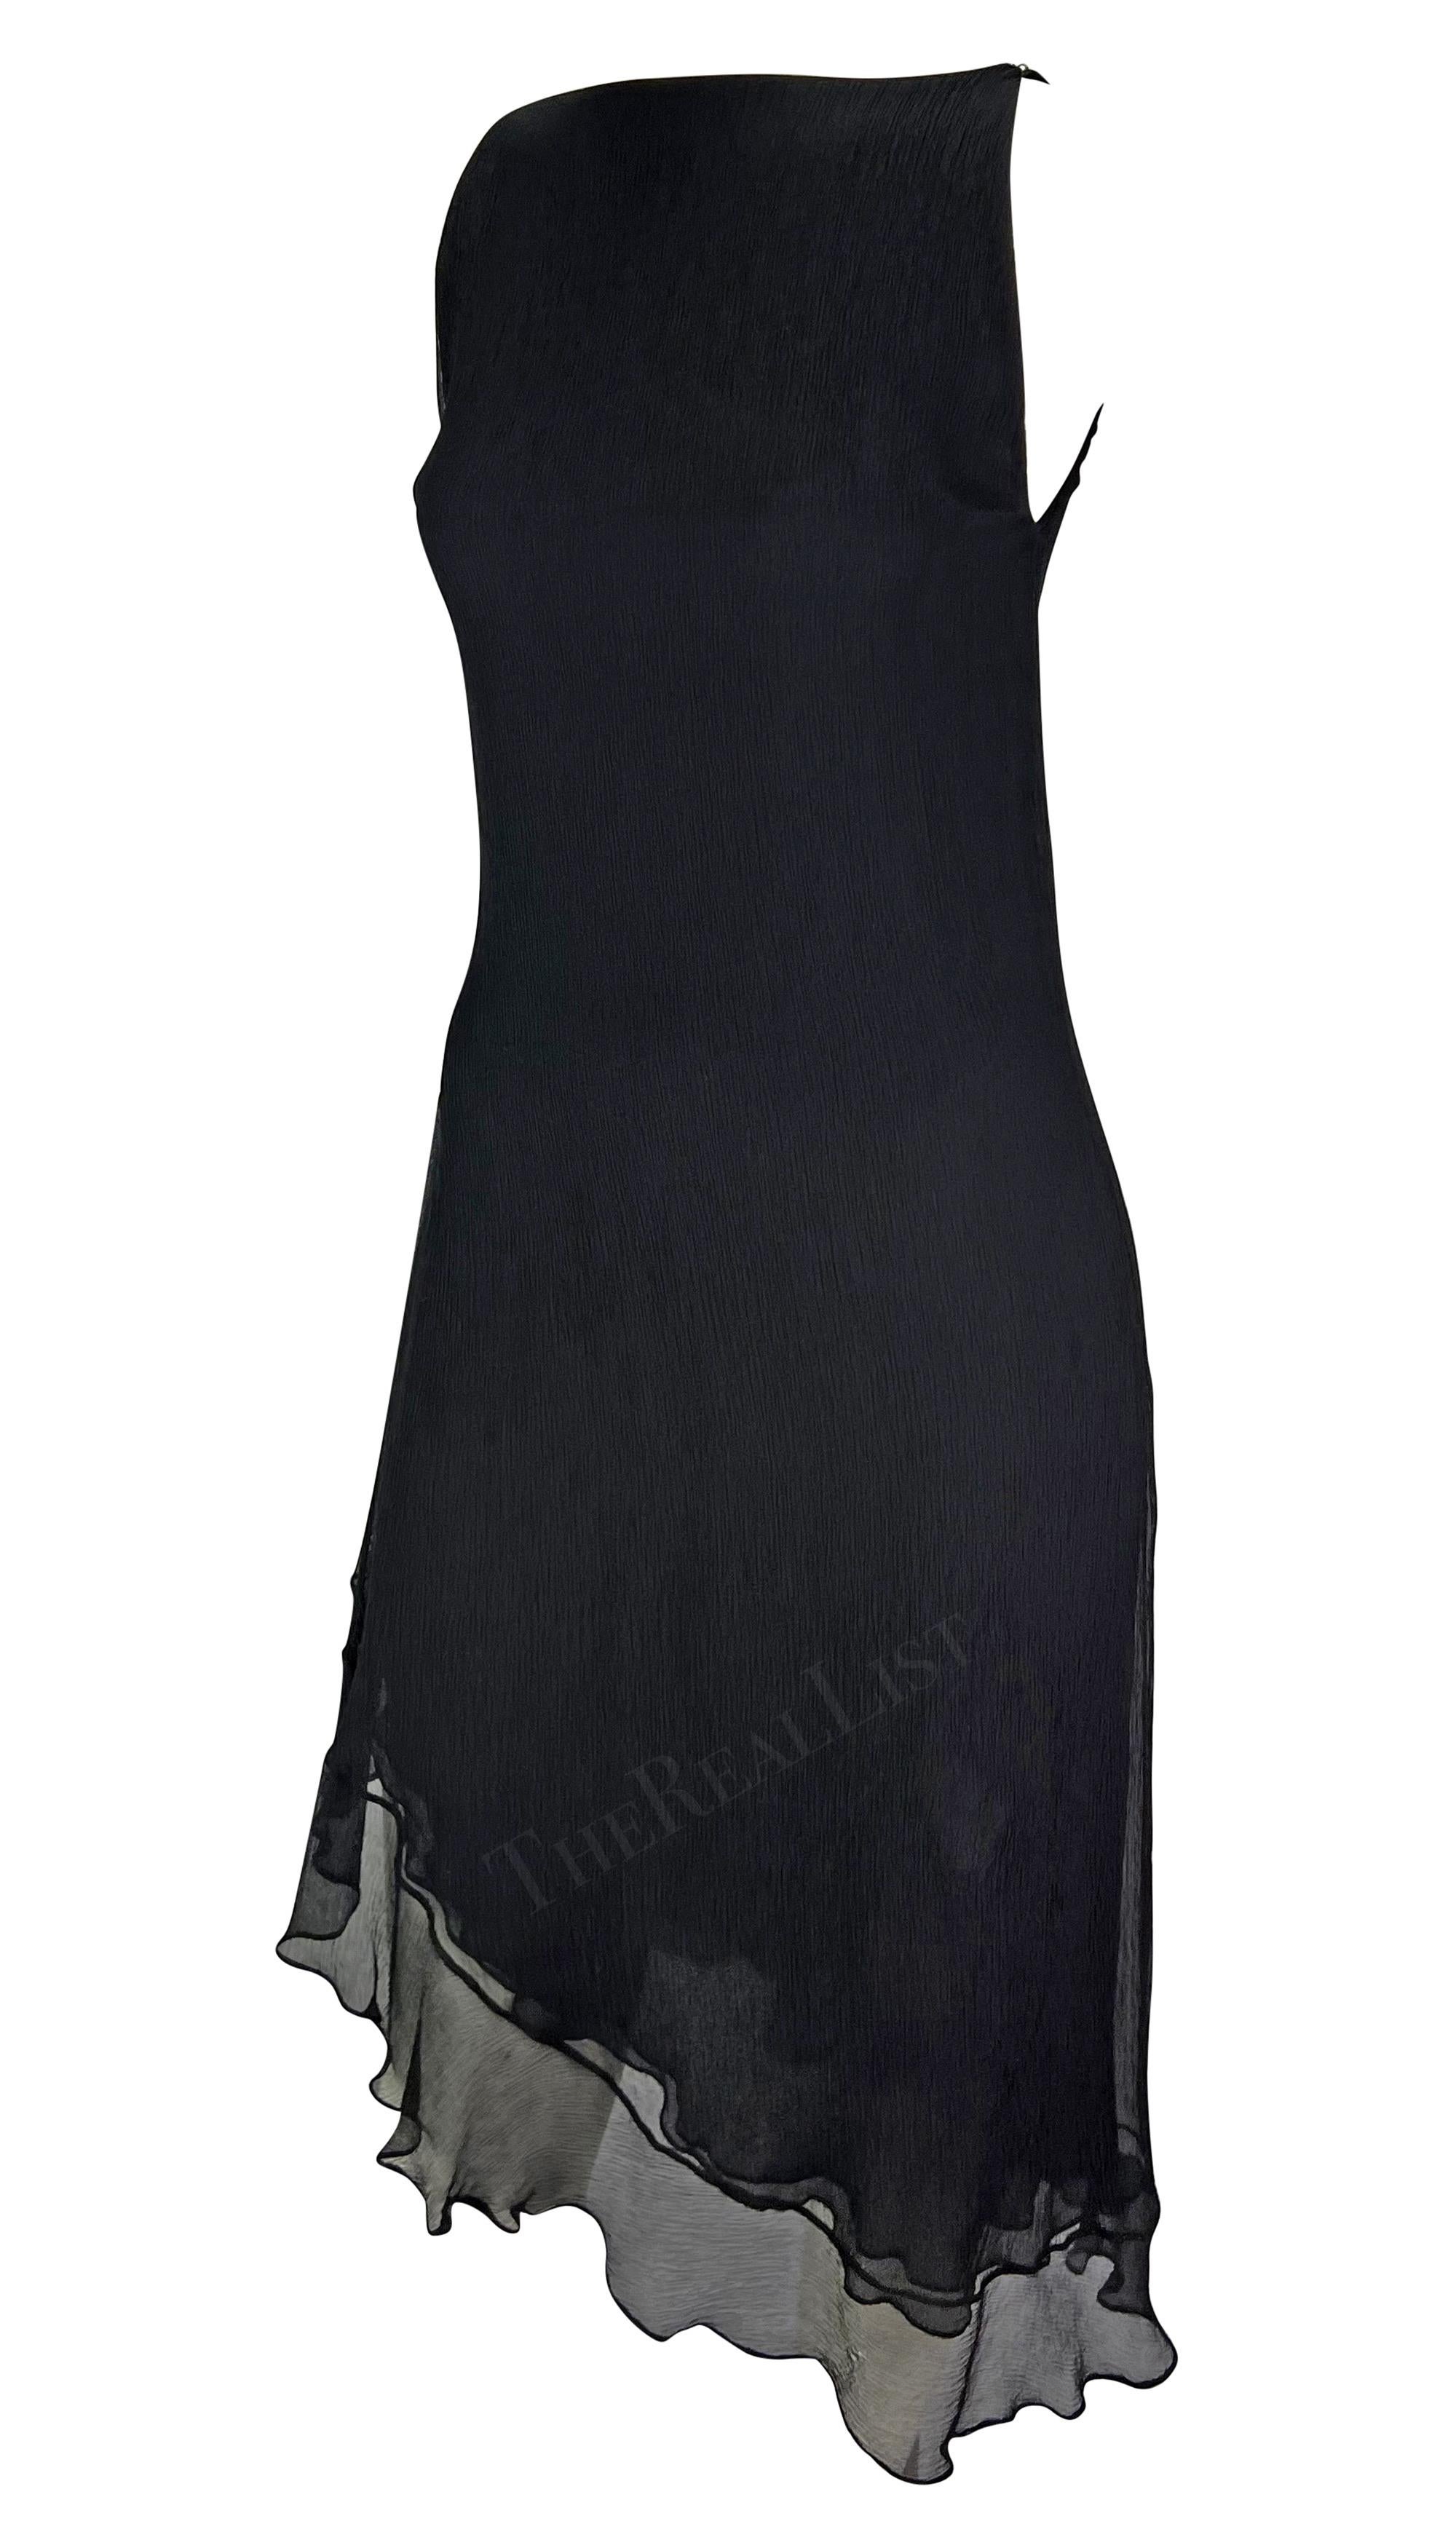 TheRealList presents: a beautiful black crepe silk Gucci dress, designed by Tom Ford. From the Spring/Summer 2000 collection, this effortlessly chic dress features a high neckline and asymmetric ruffle hem. One armhole is intentionally left larger